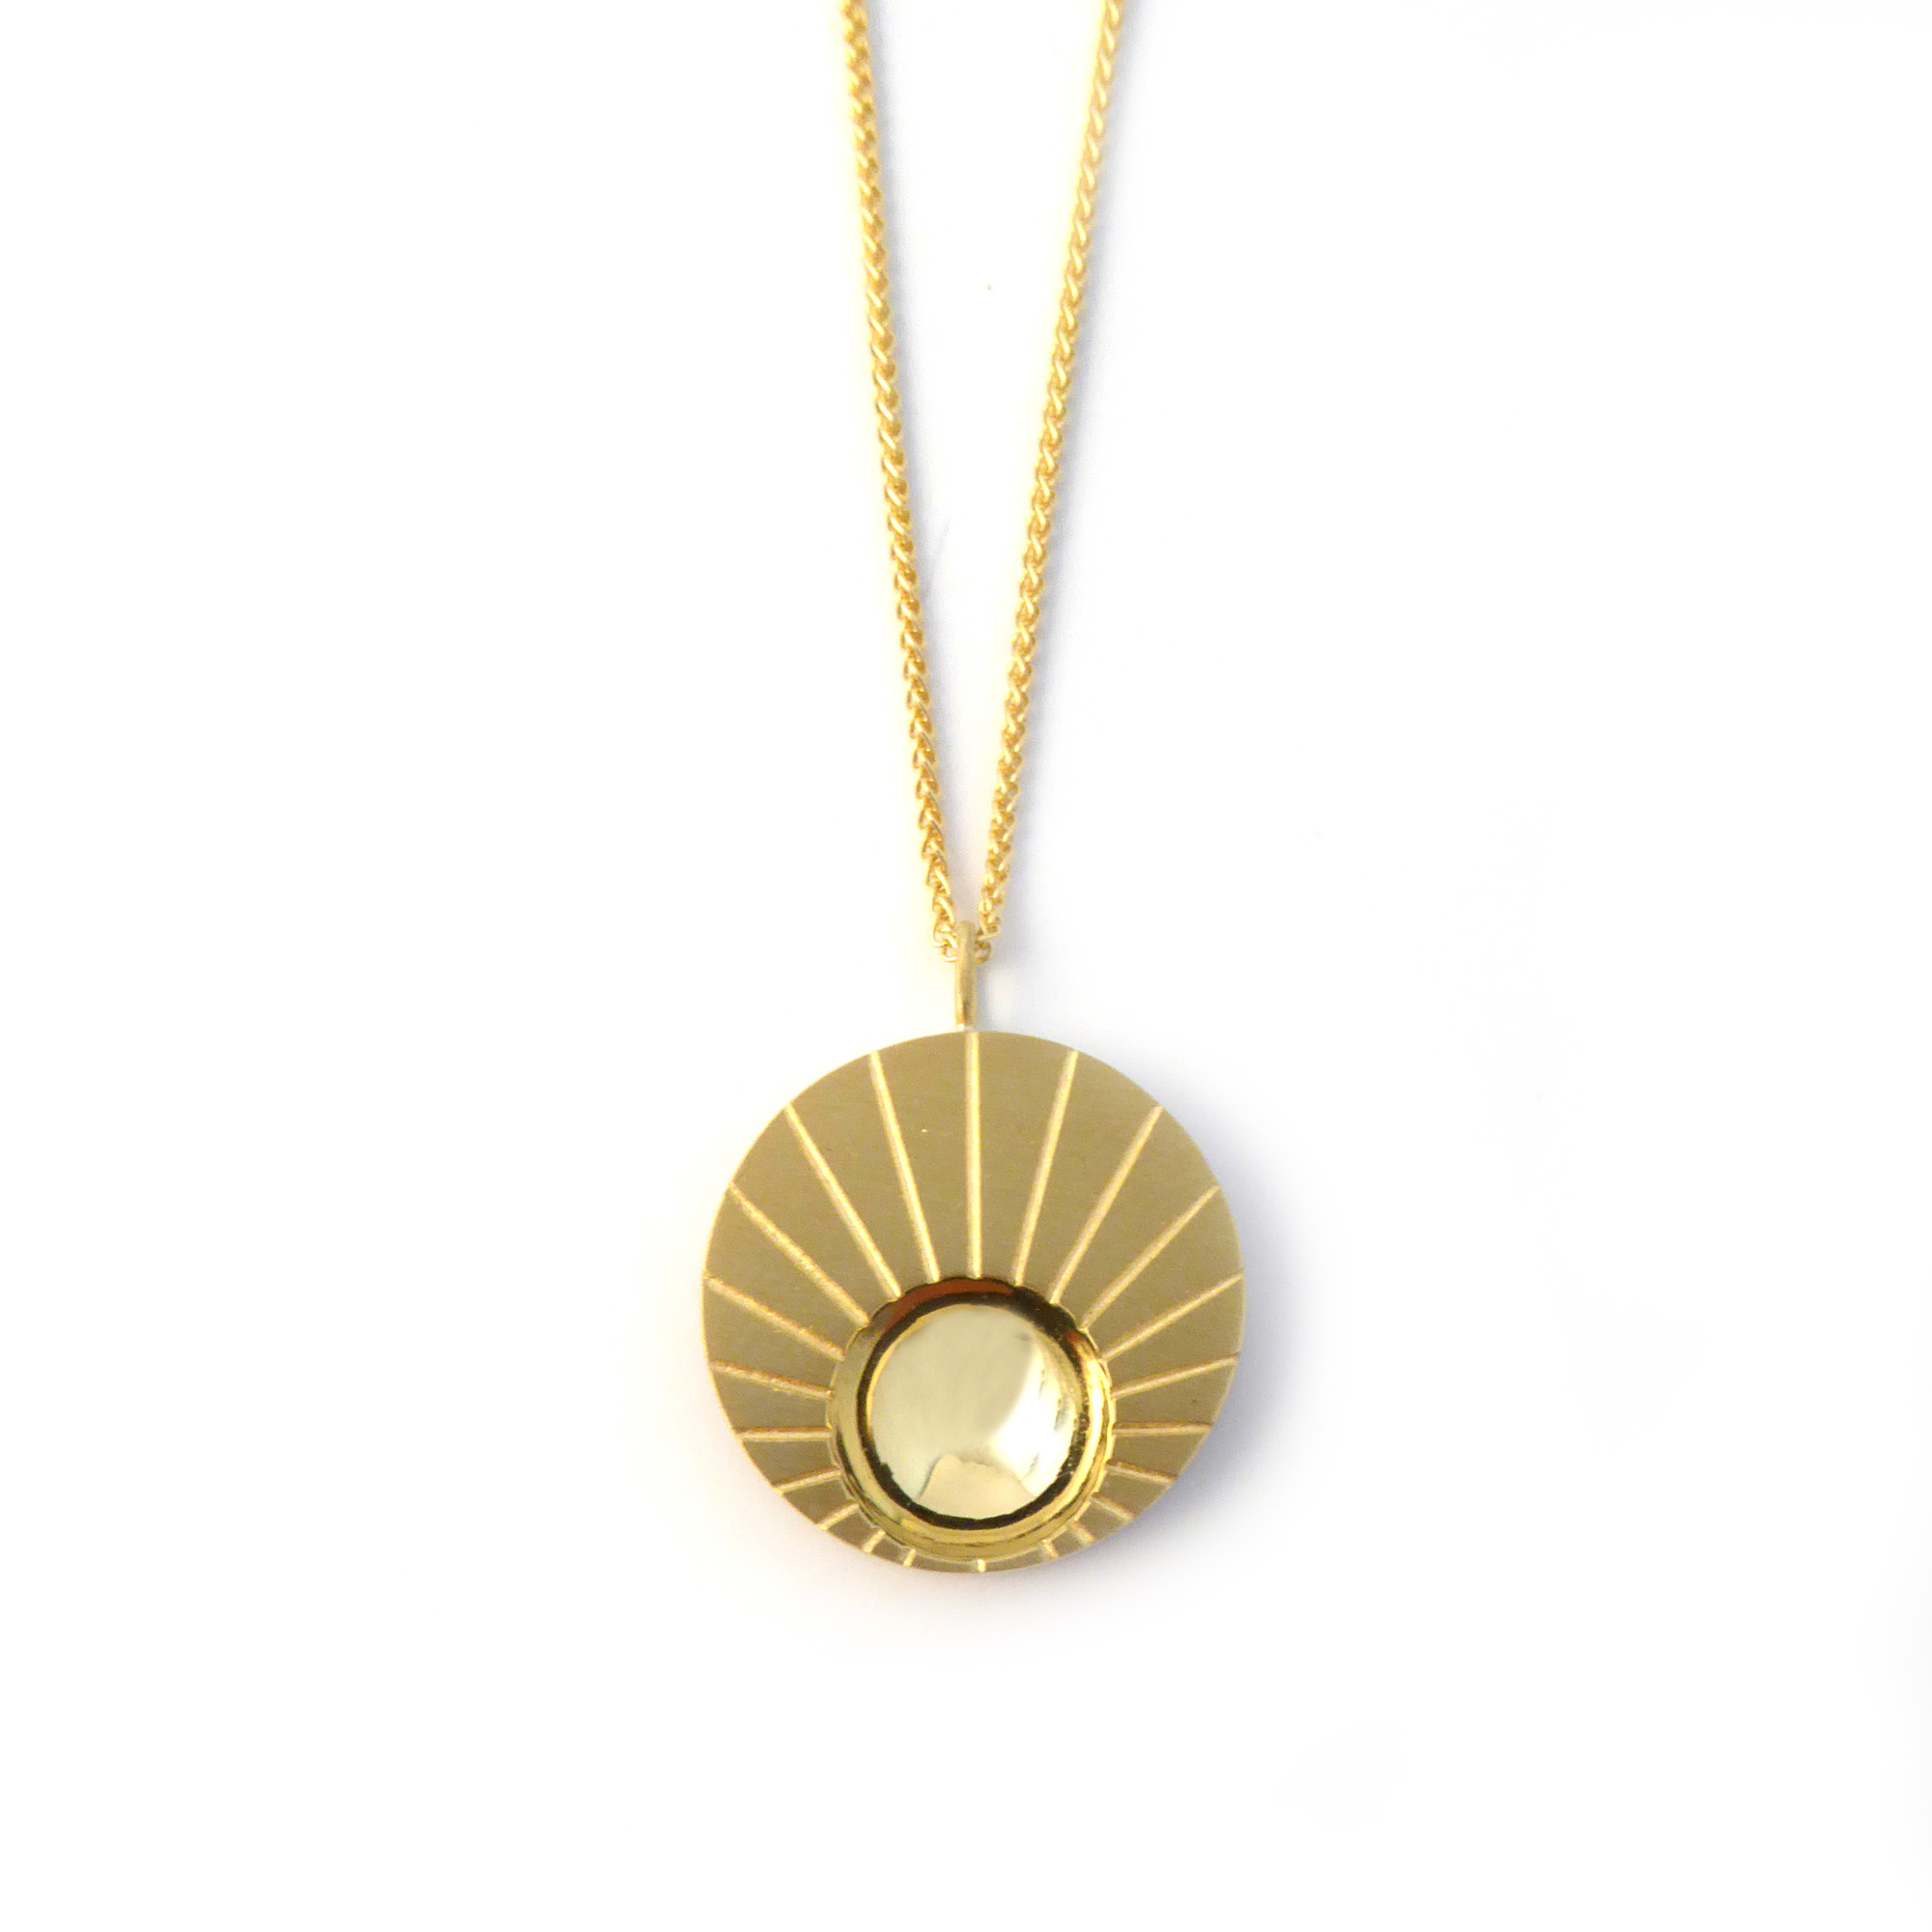 Gold Pendant Necklace - Chloe Necklace | Ana Luisa | Online Jewelry Store  At Prices You'll Love